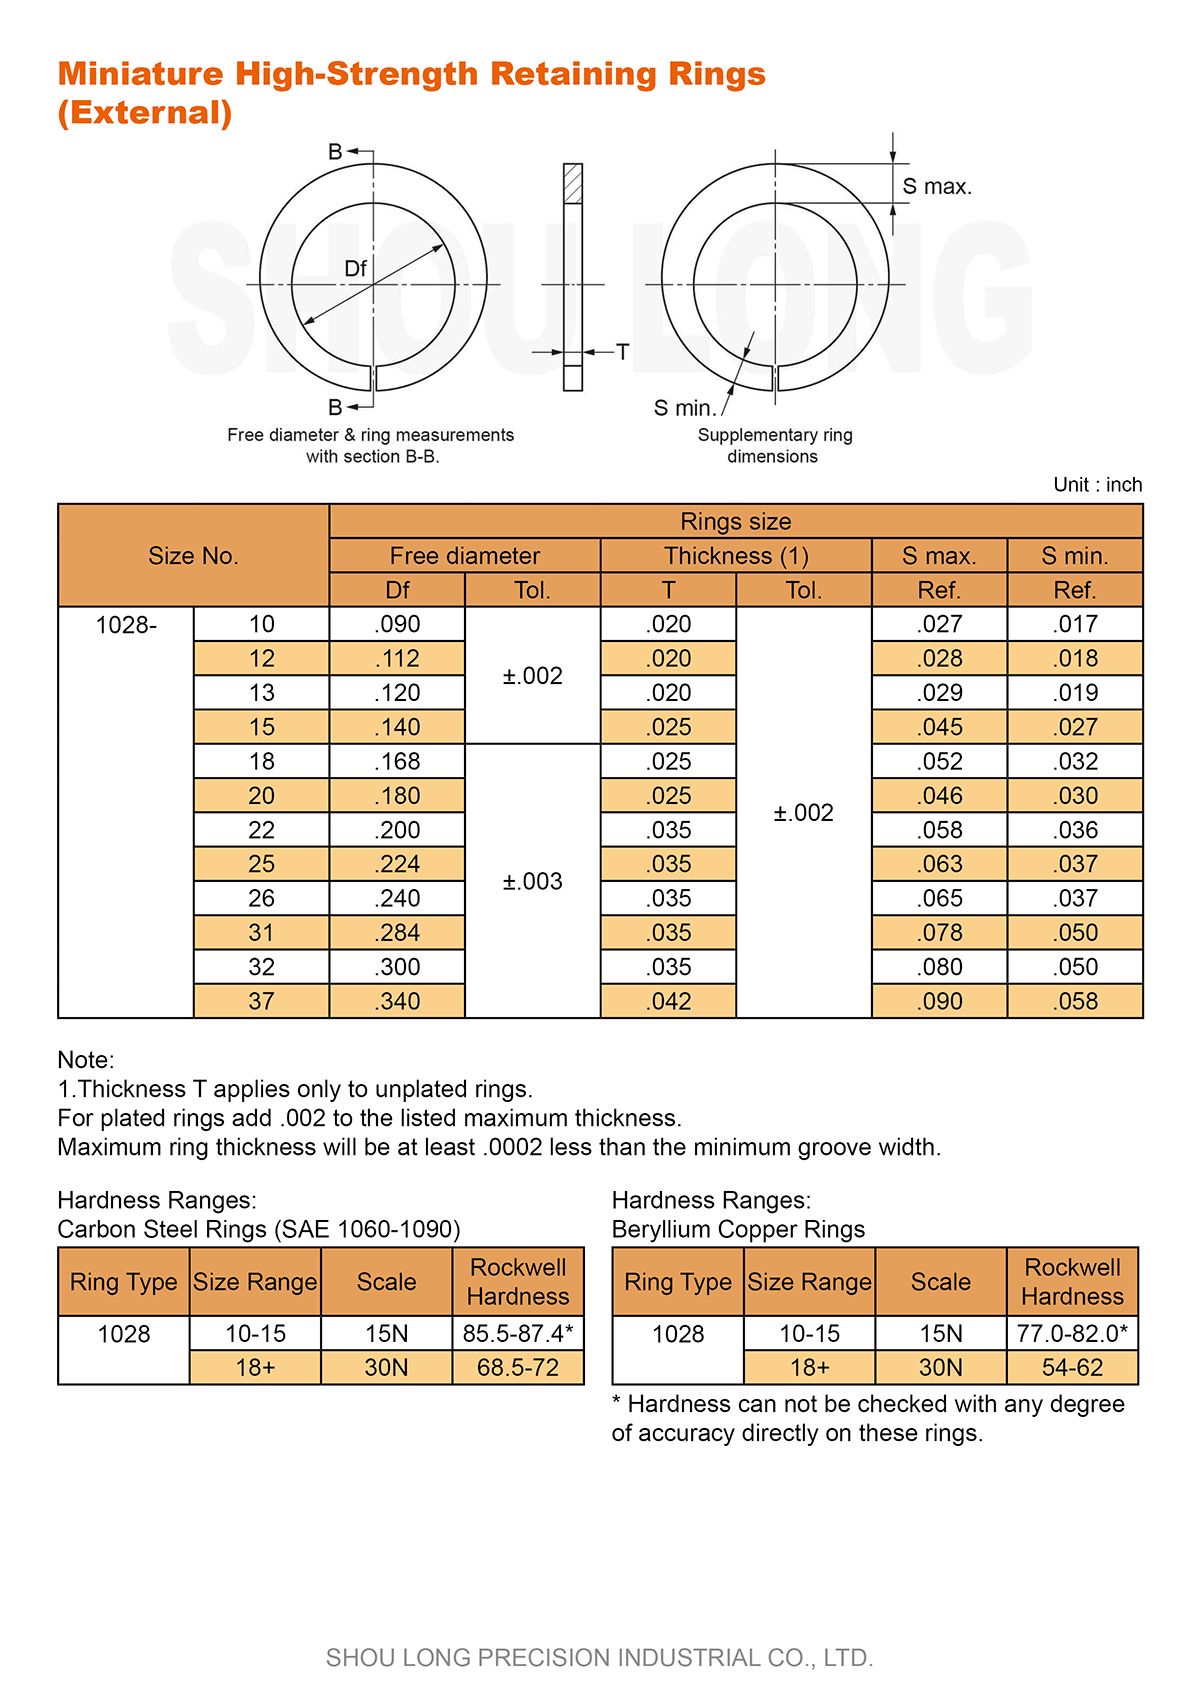 Spec of Inch Miniature High-Strength Retaining Rings for Shaft